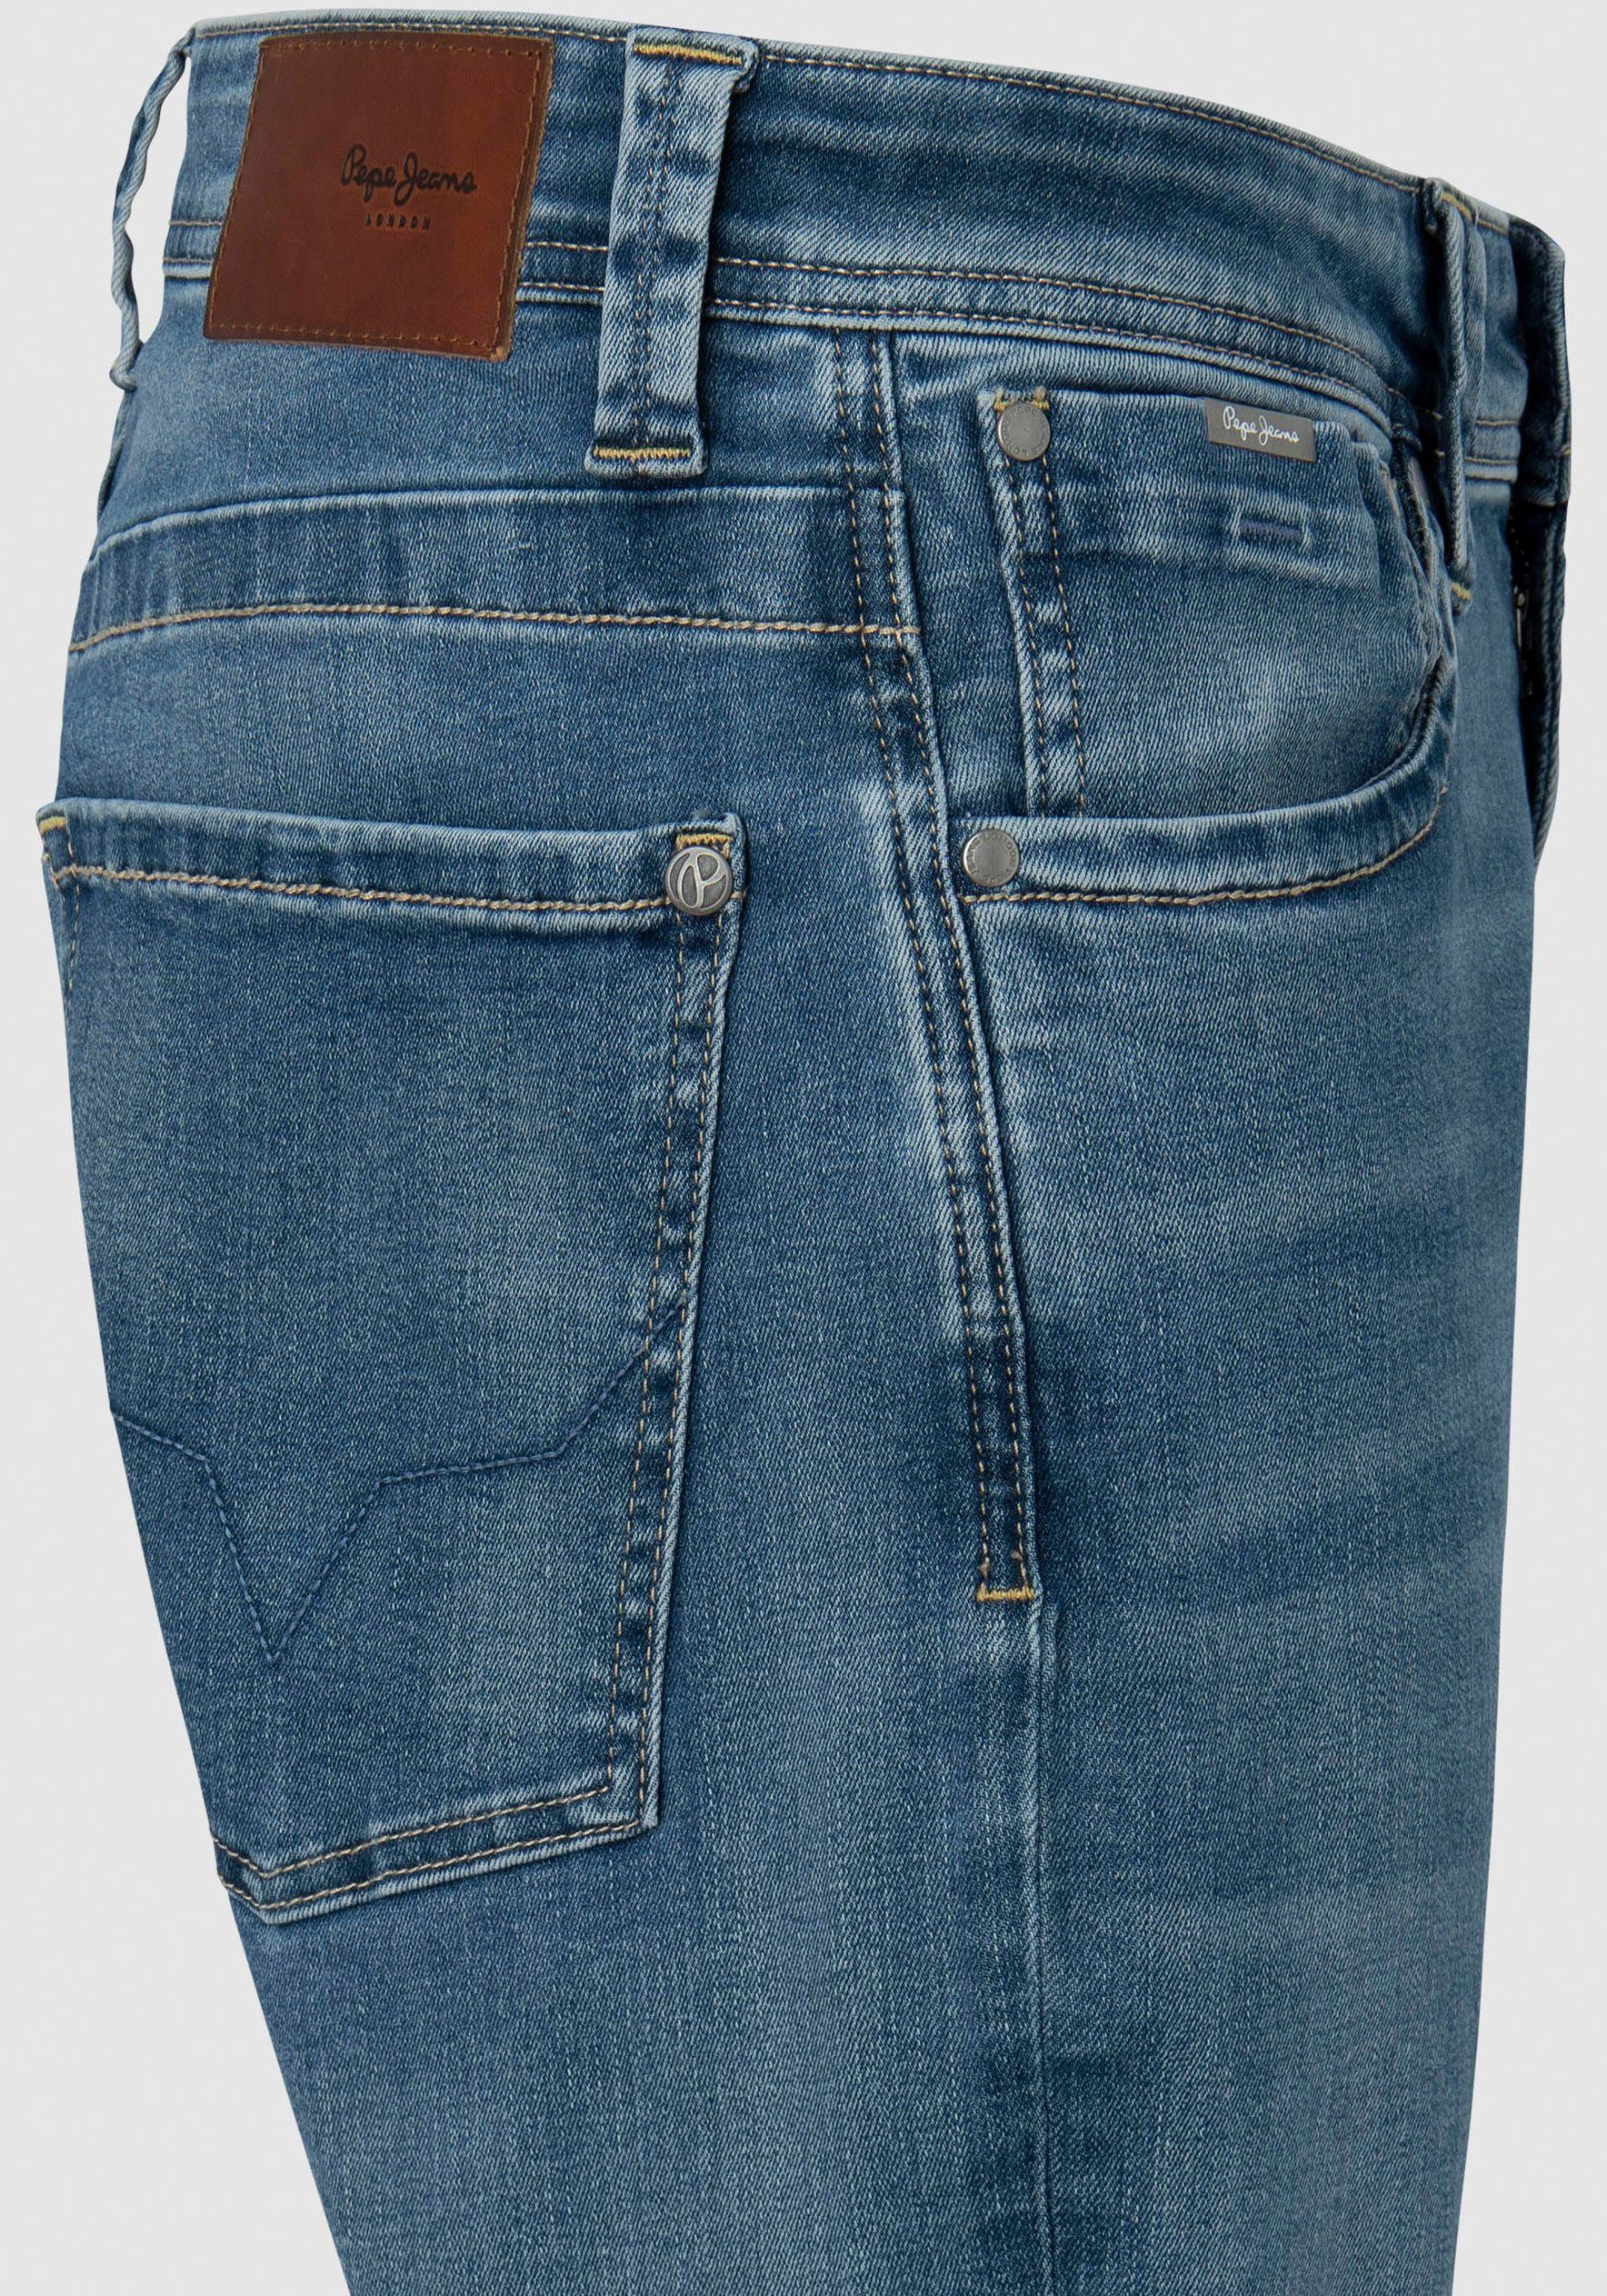 limewiser 5-Pocket-Form in ZIP Straight-Jeans Pepe KINGSTON Jeans